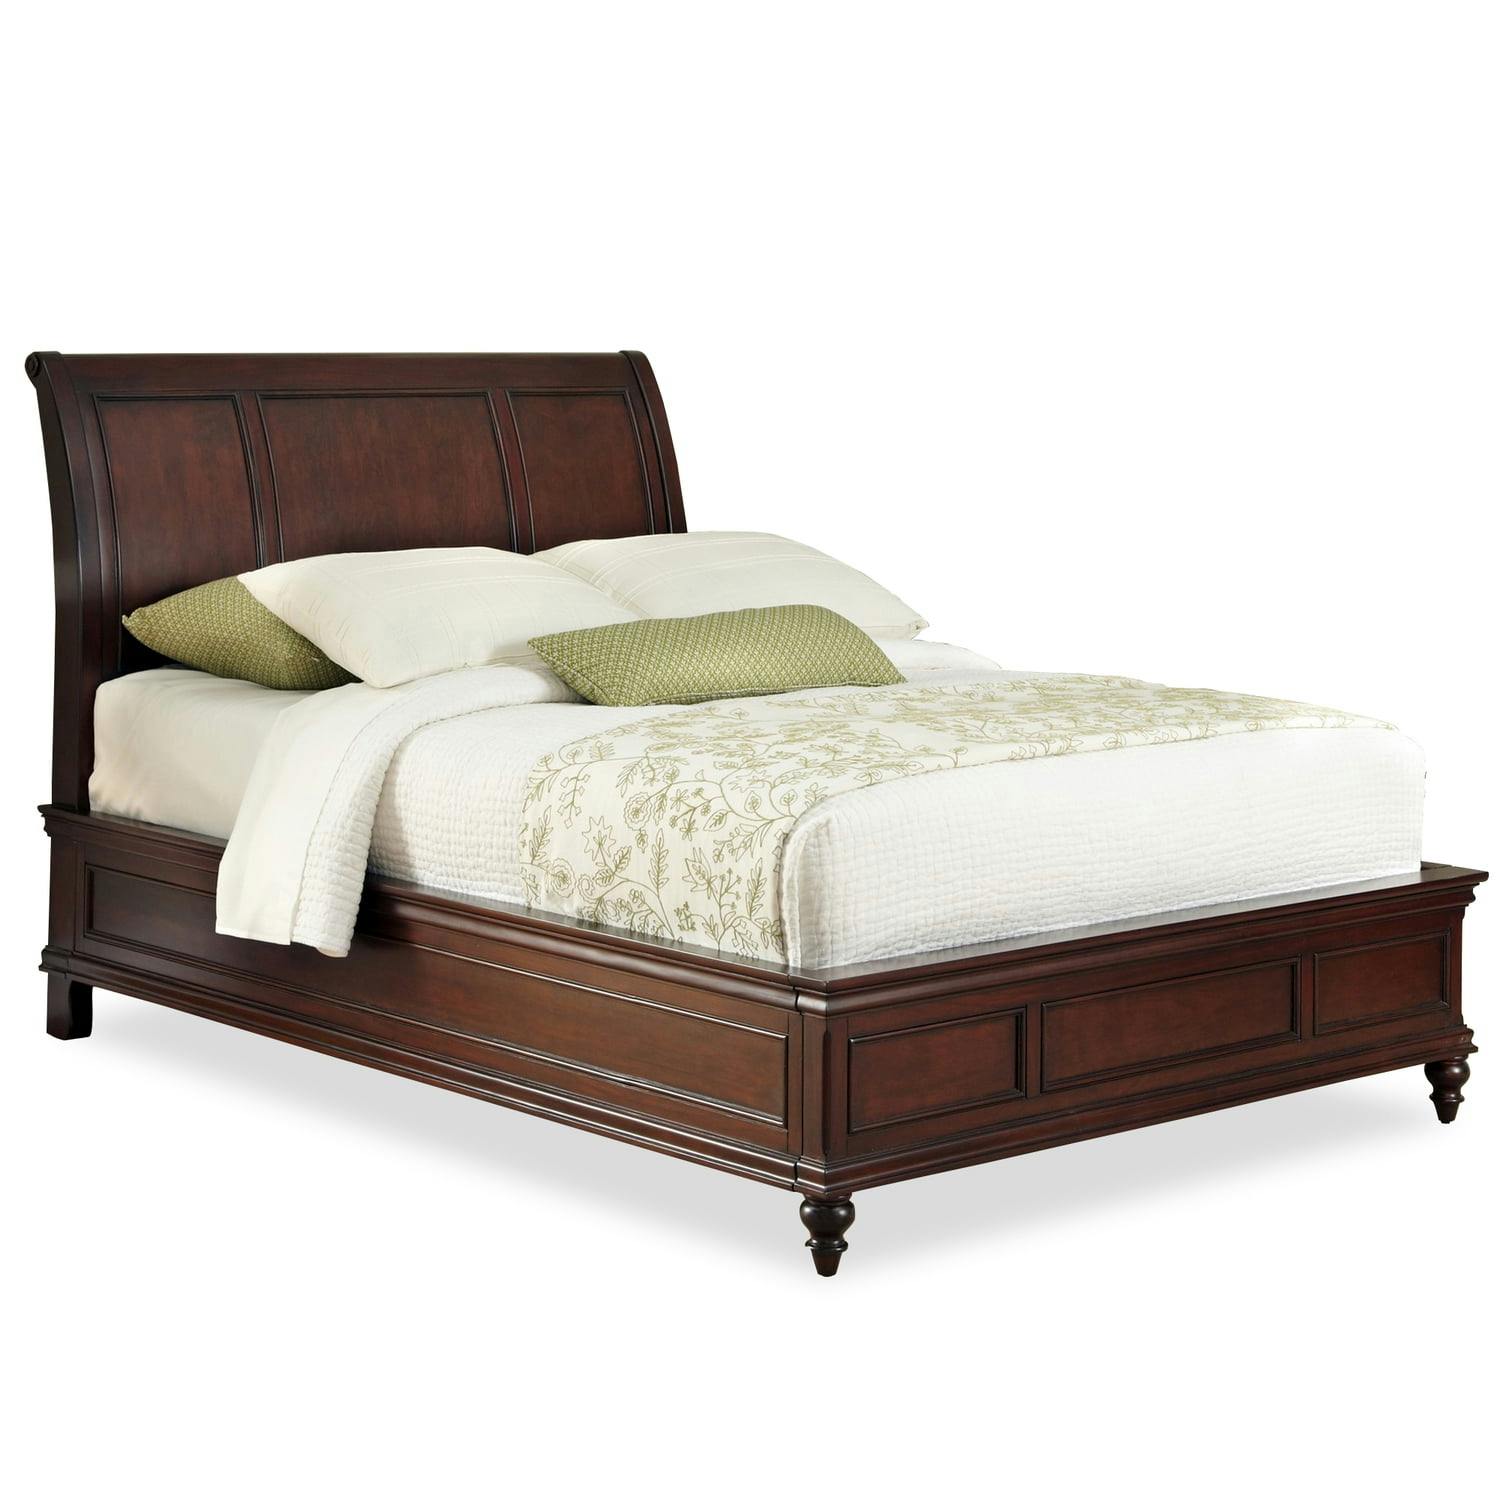 Lafayette Elegance King Sleigh Bed with Storage Drawers in Cherry Mahogany